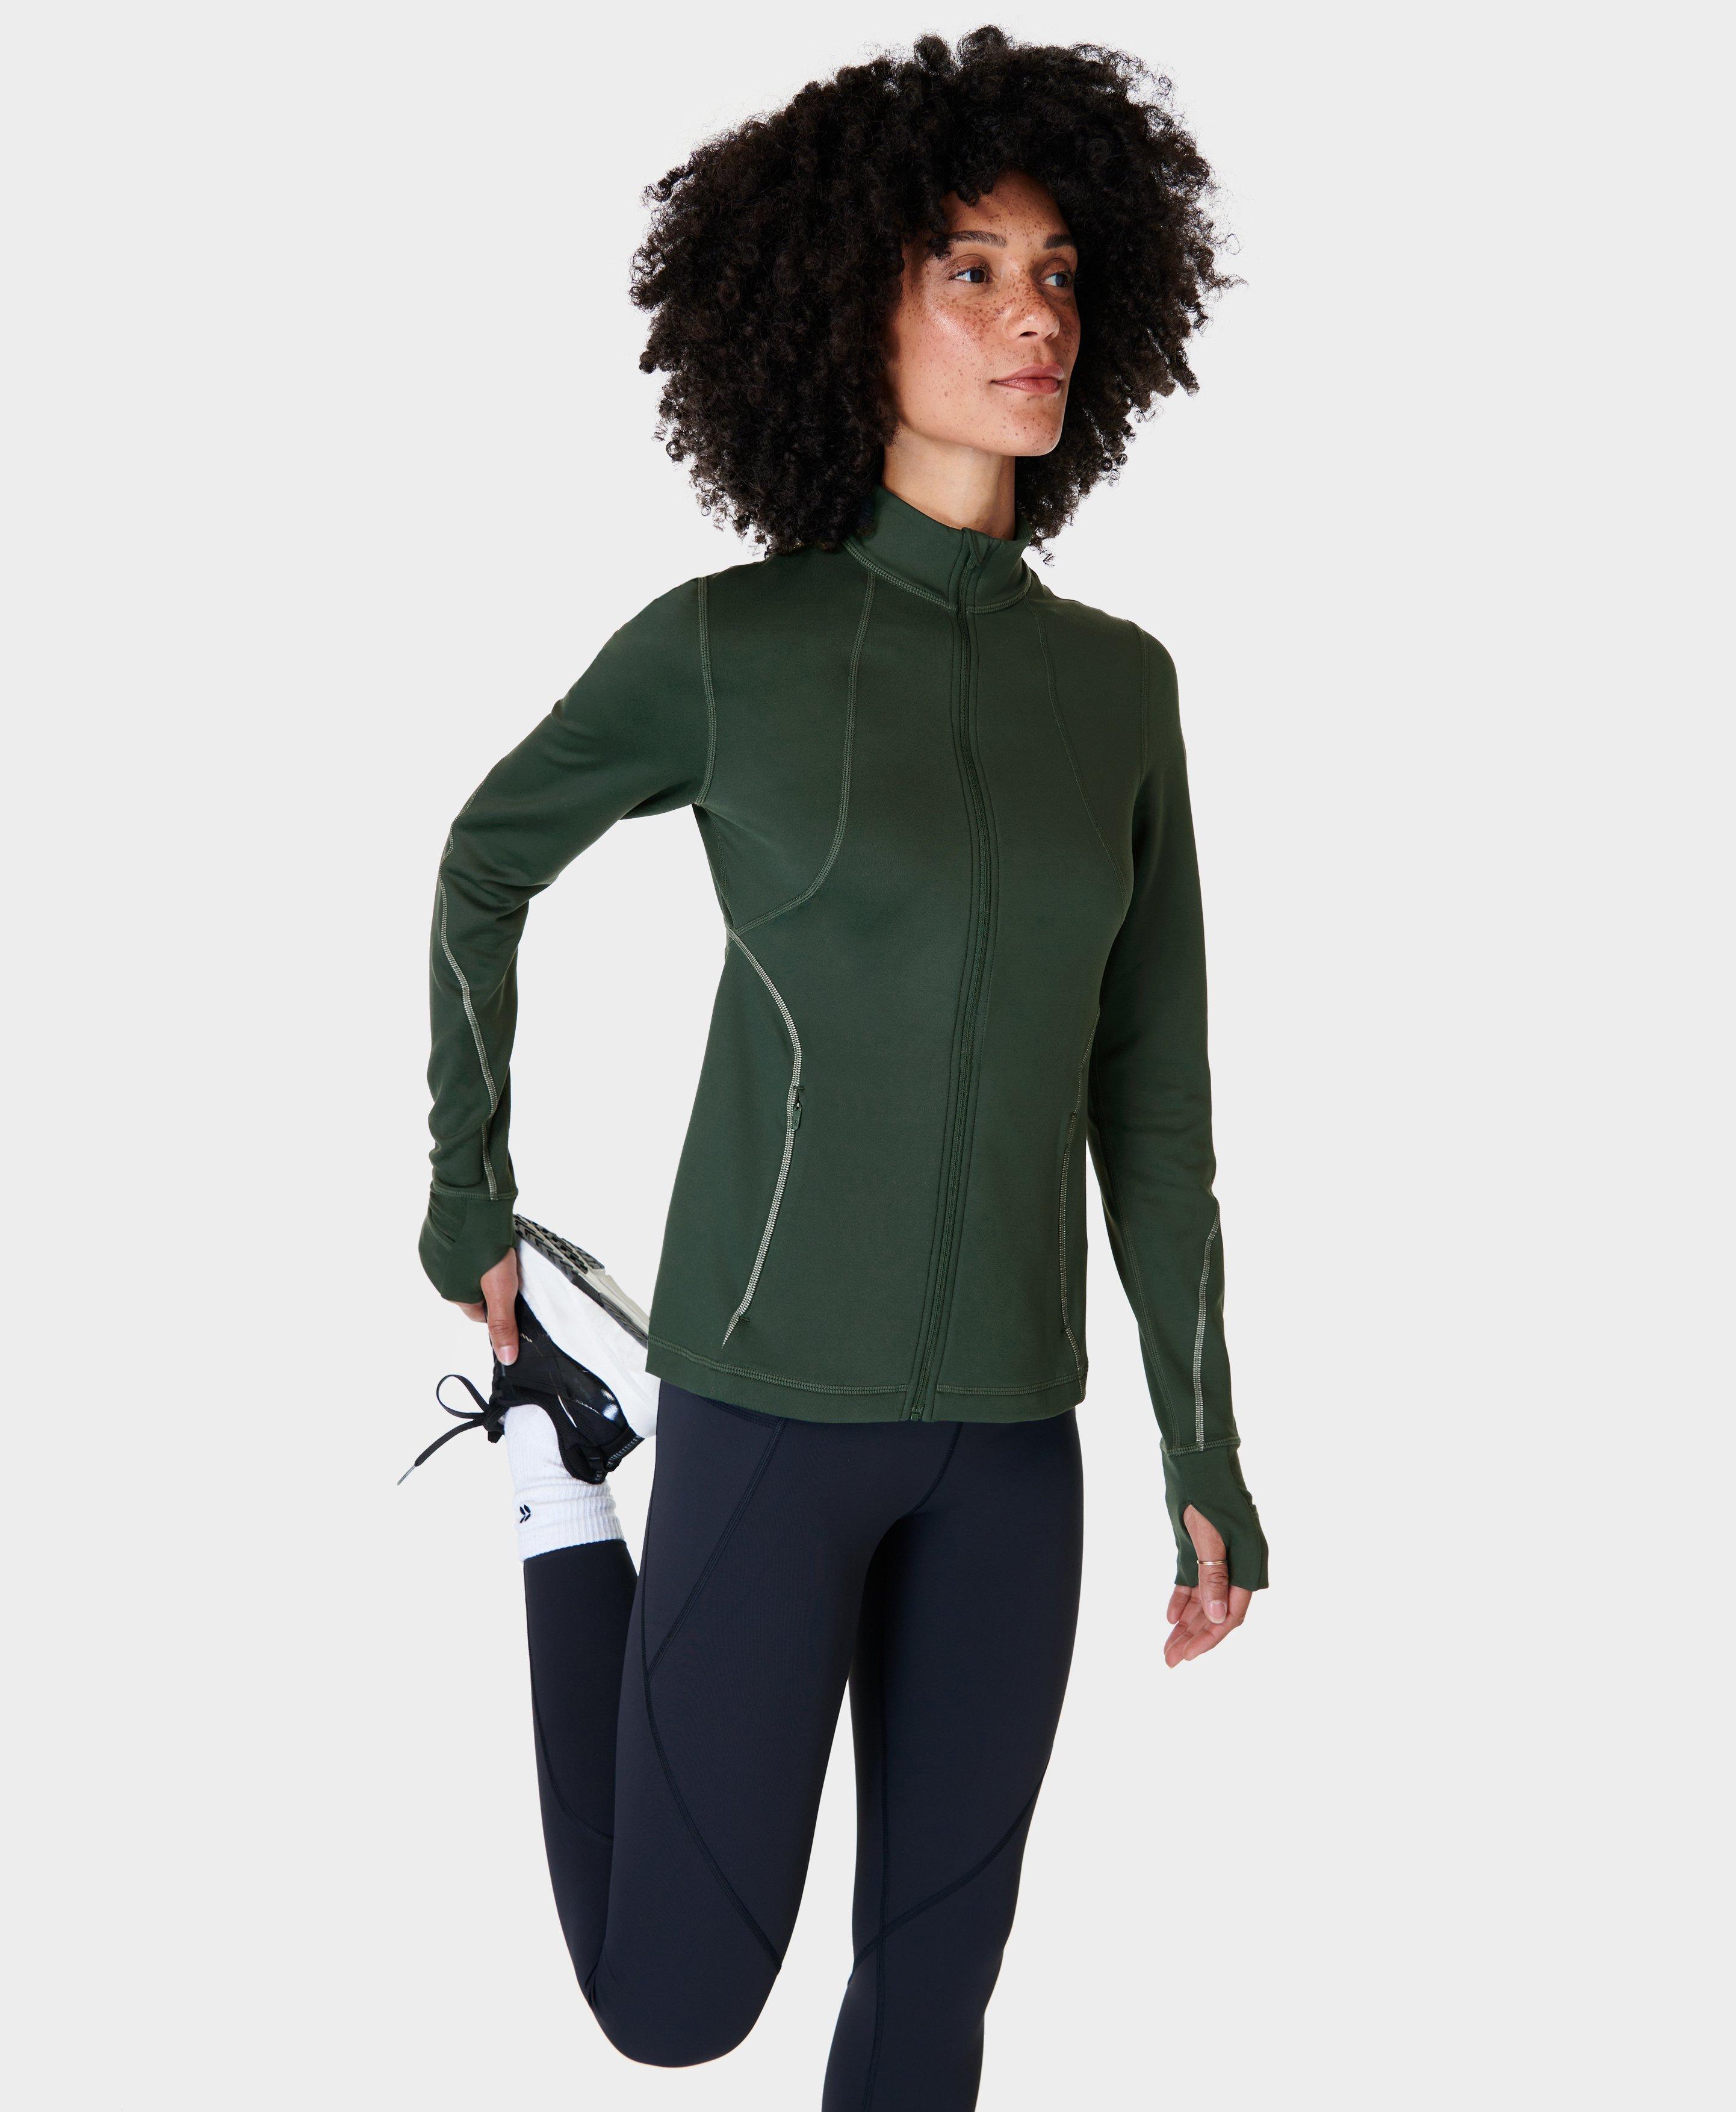 Therma Boost Running Zip Up